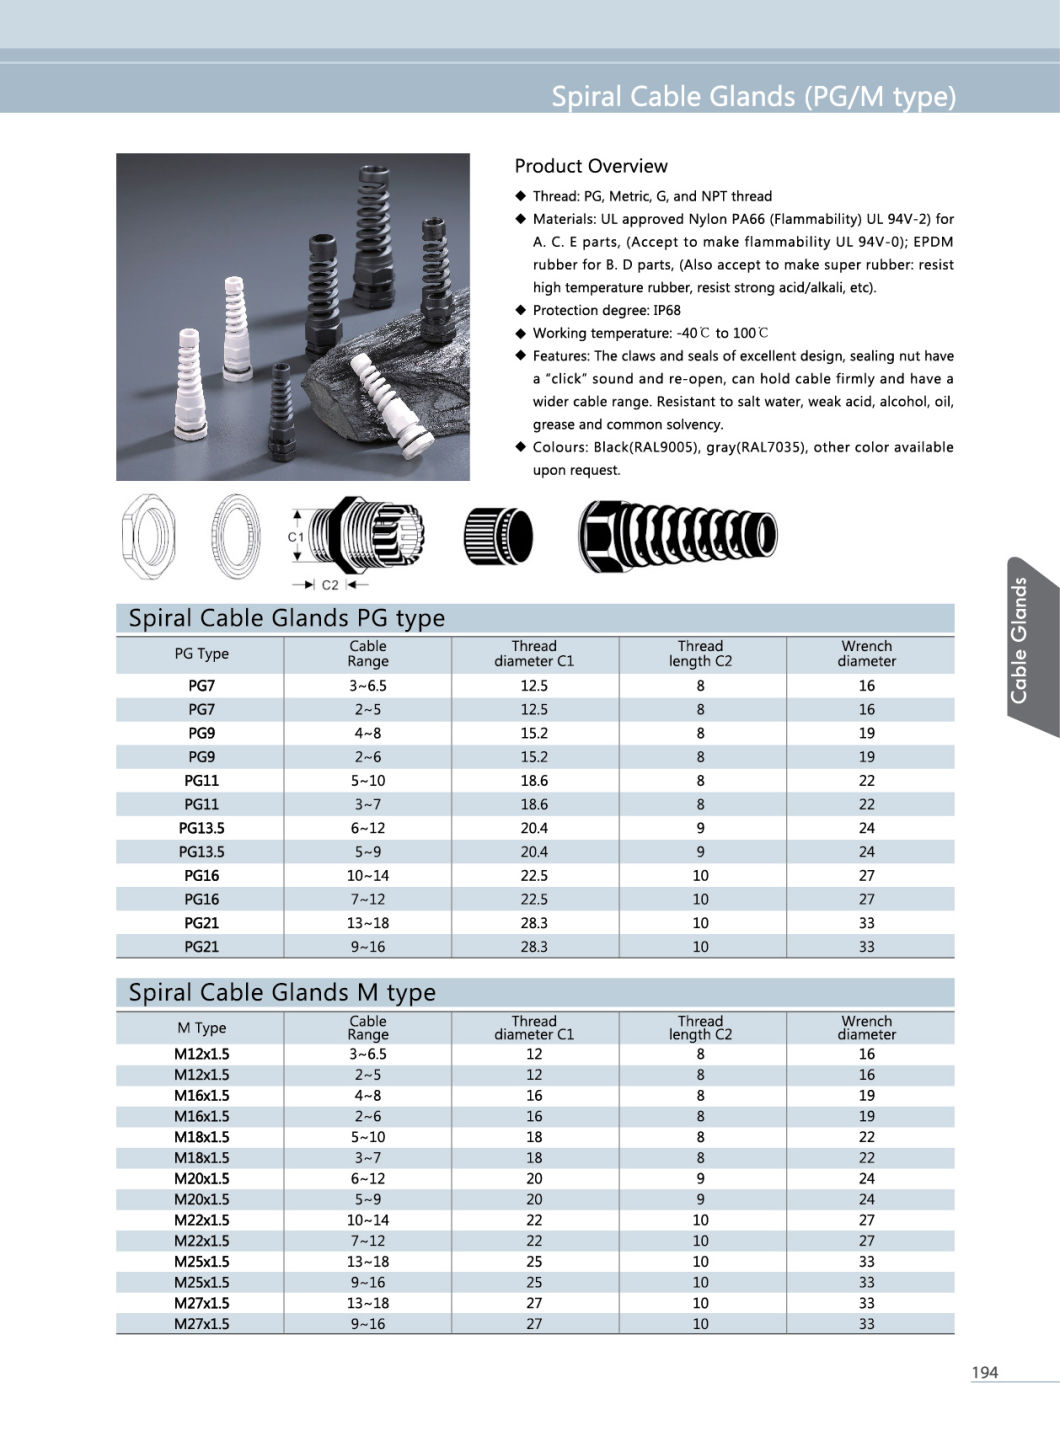 Spiral Cable Glands (PG/M type) , The Claws and Seals of Excellent Design, Resistant to Salt Water, Weak Acid, Oil etc.